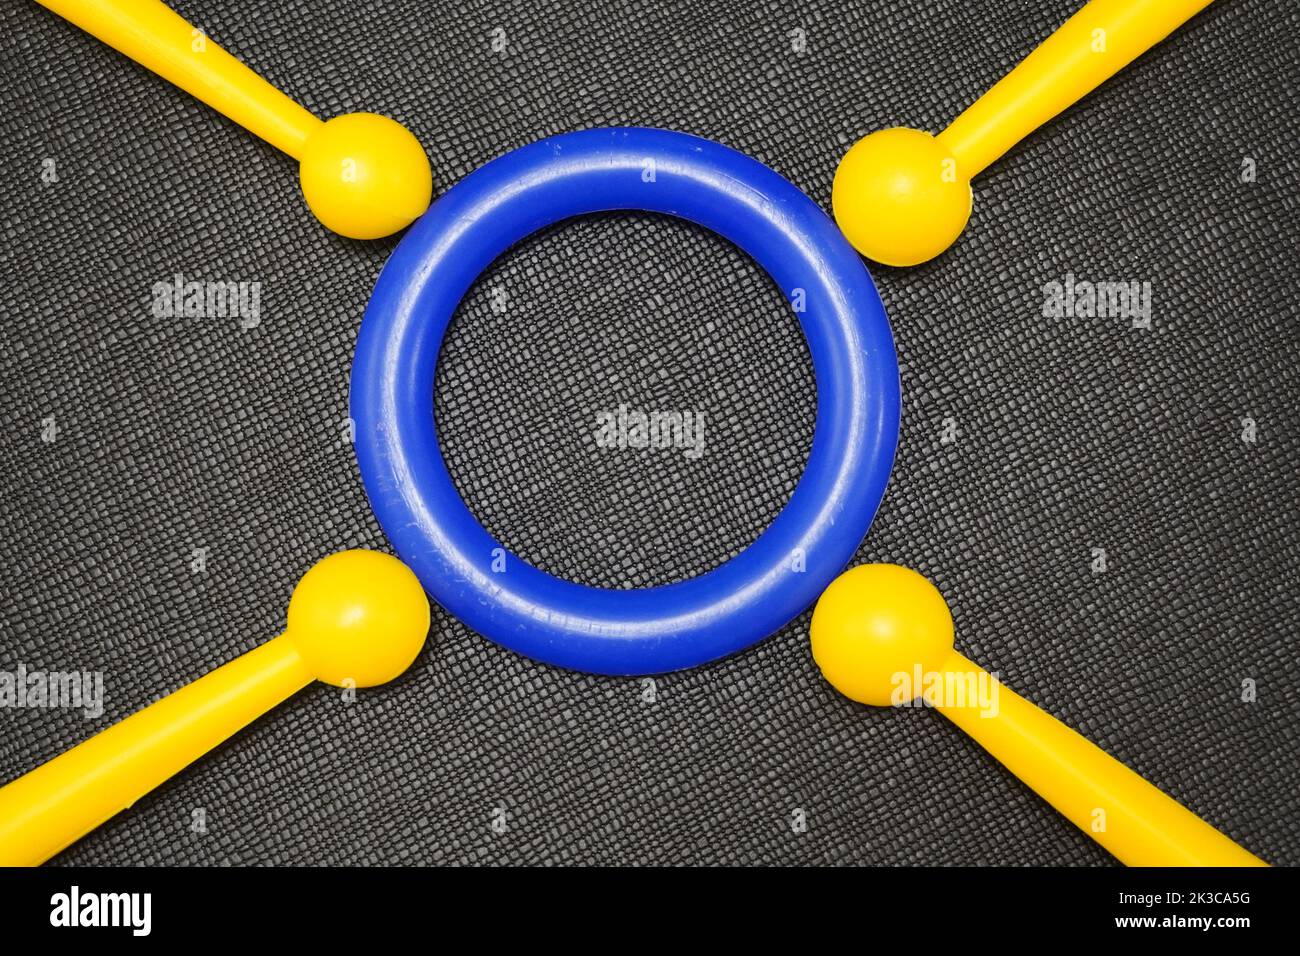 Concept with yellow and blue toy sticks and rings in front of black background. Colorful plastic ring and sticks. Yellow and blue. Stock Photo